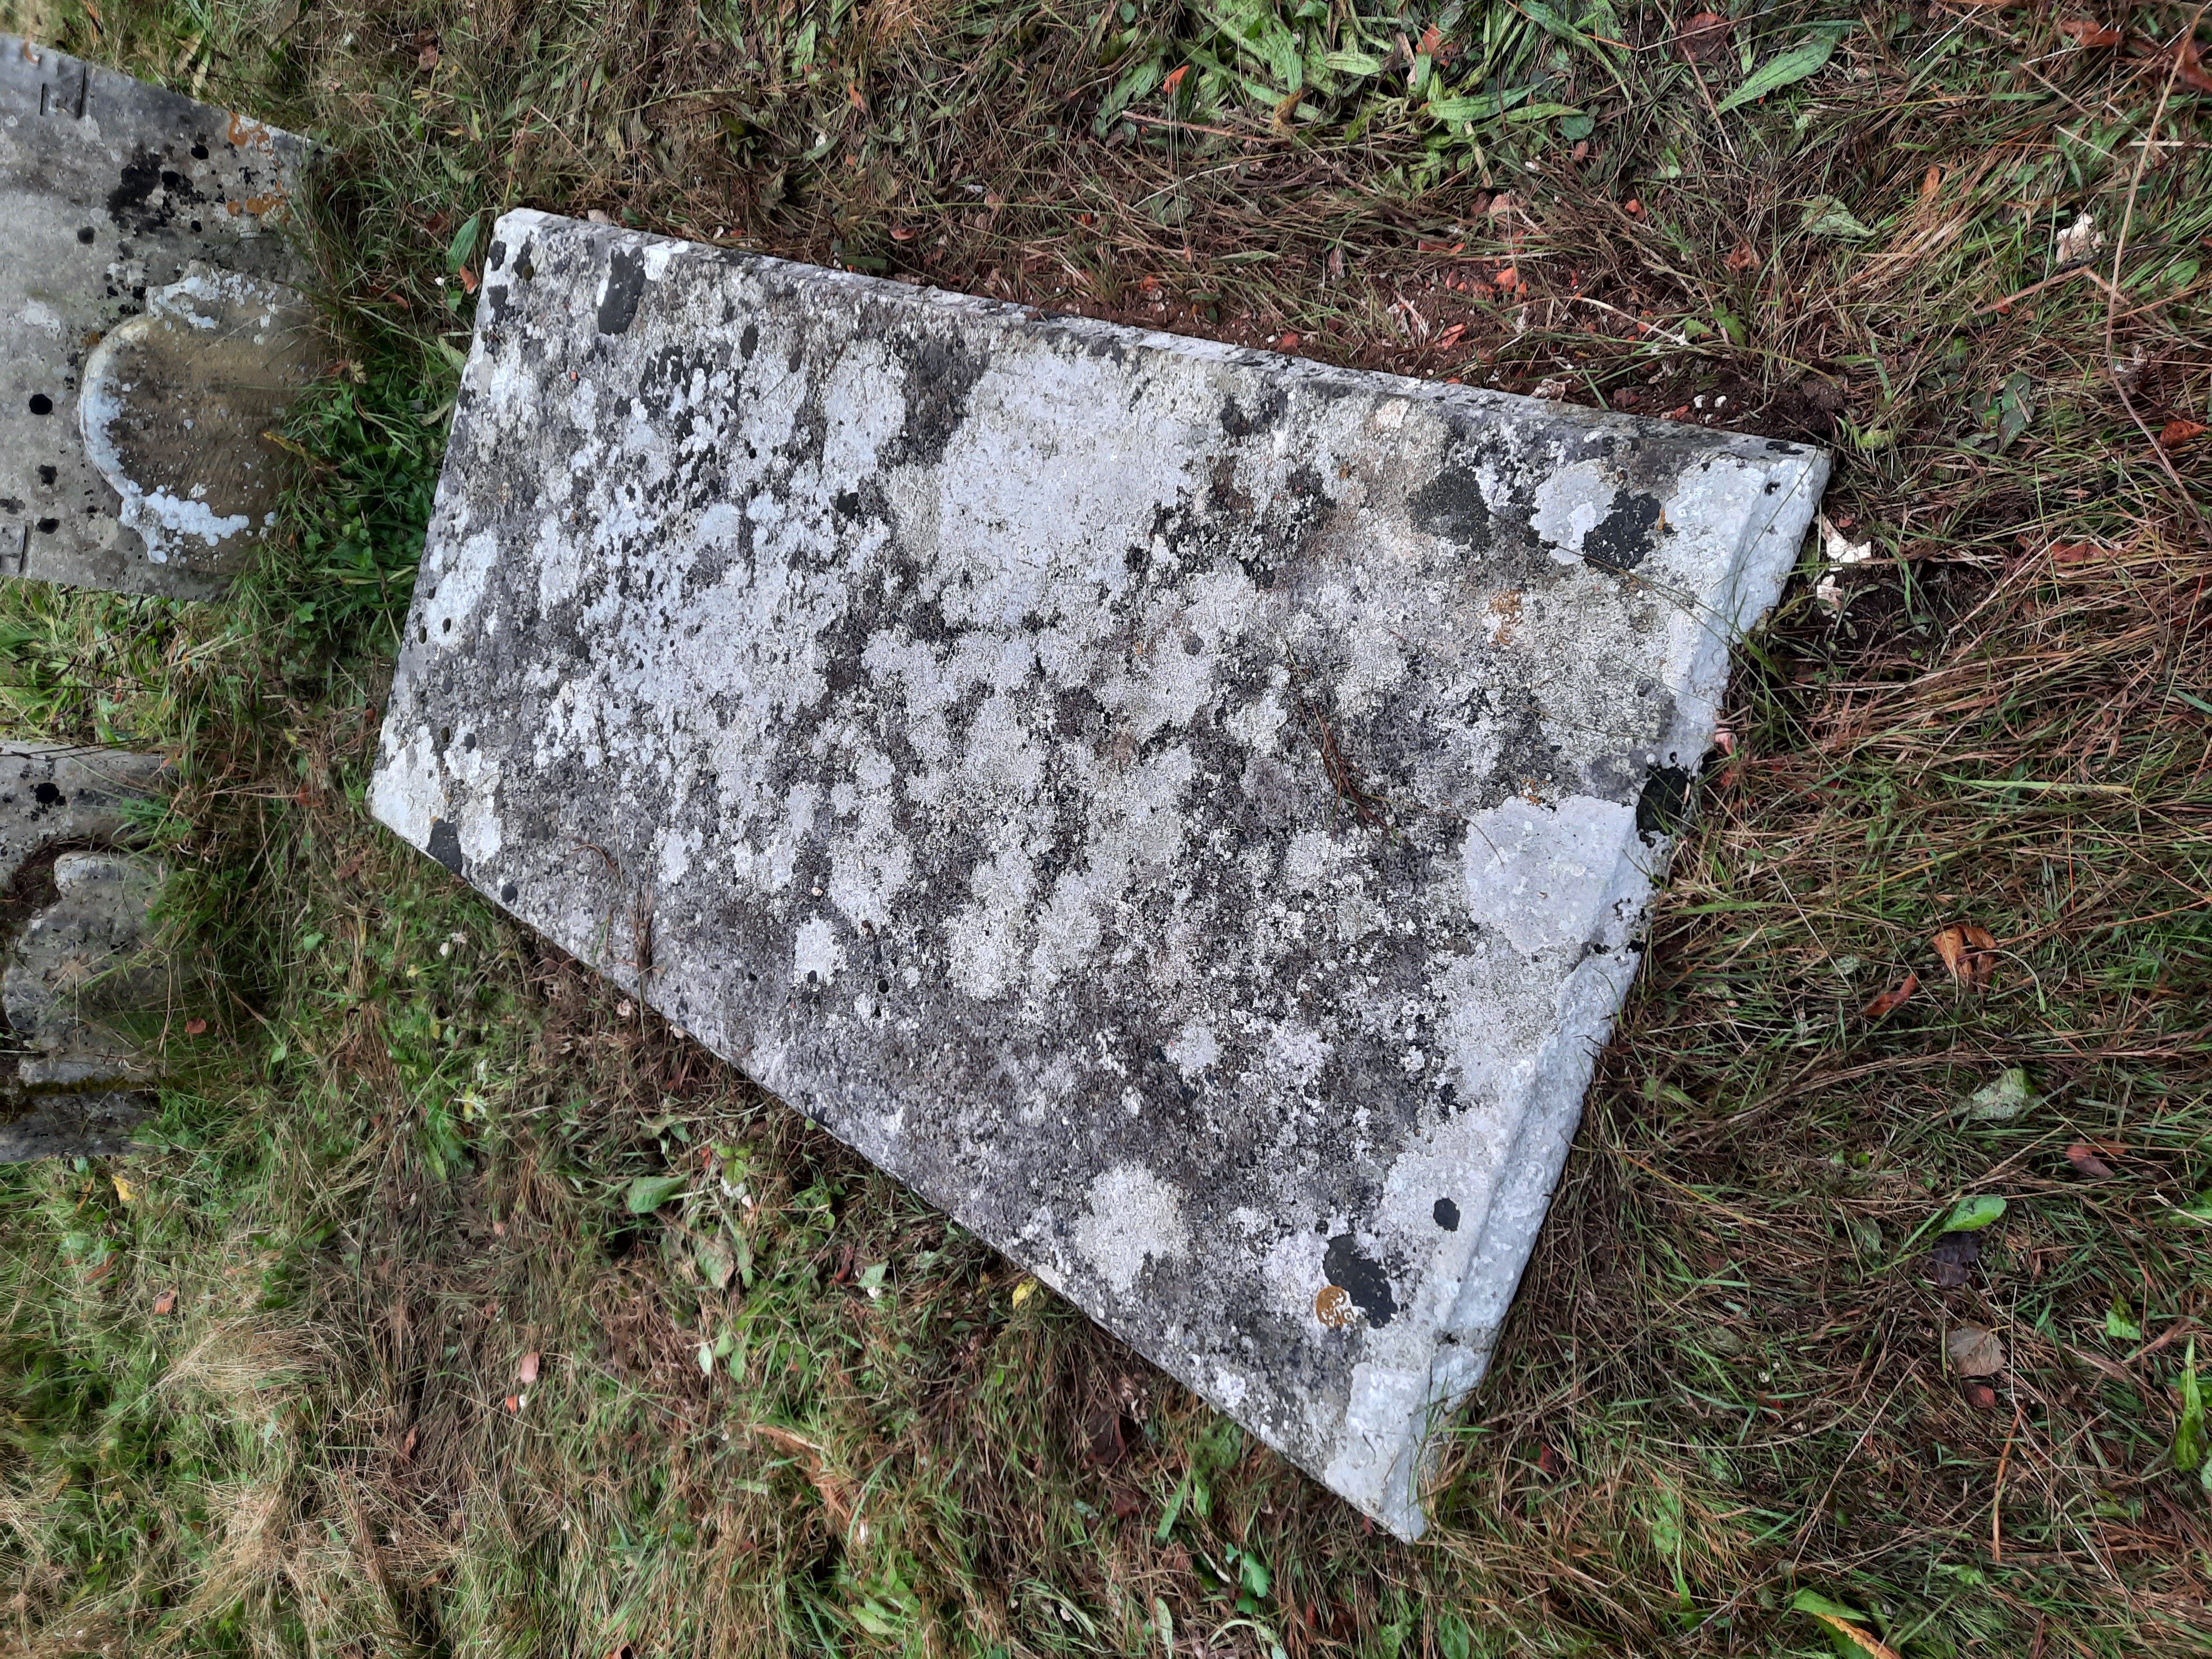 Gravestone after completion of work